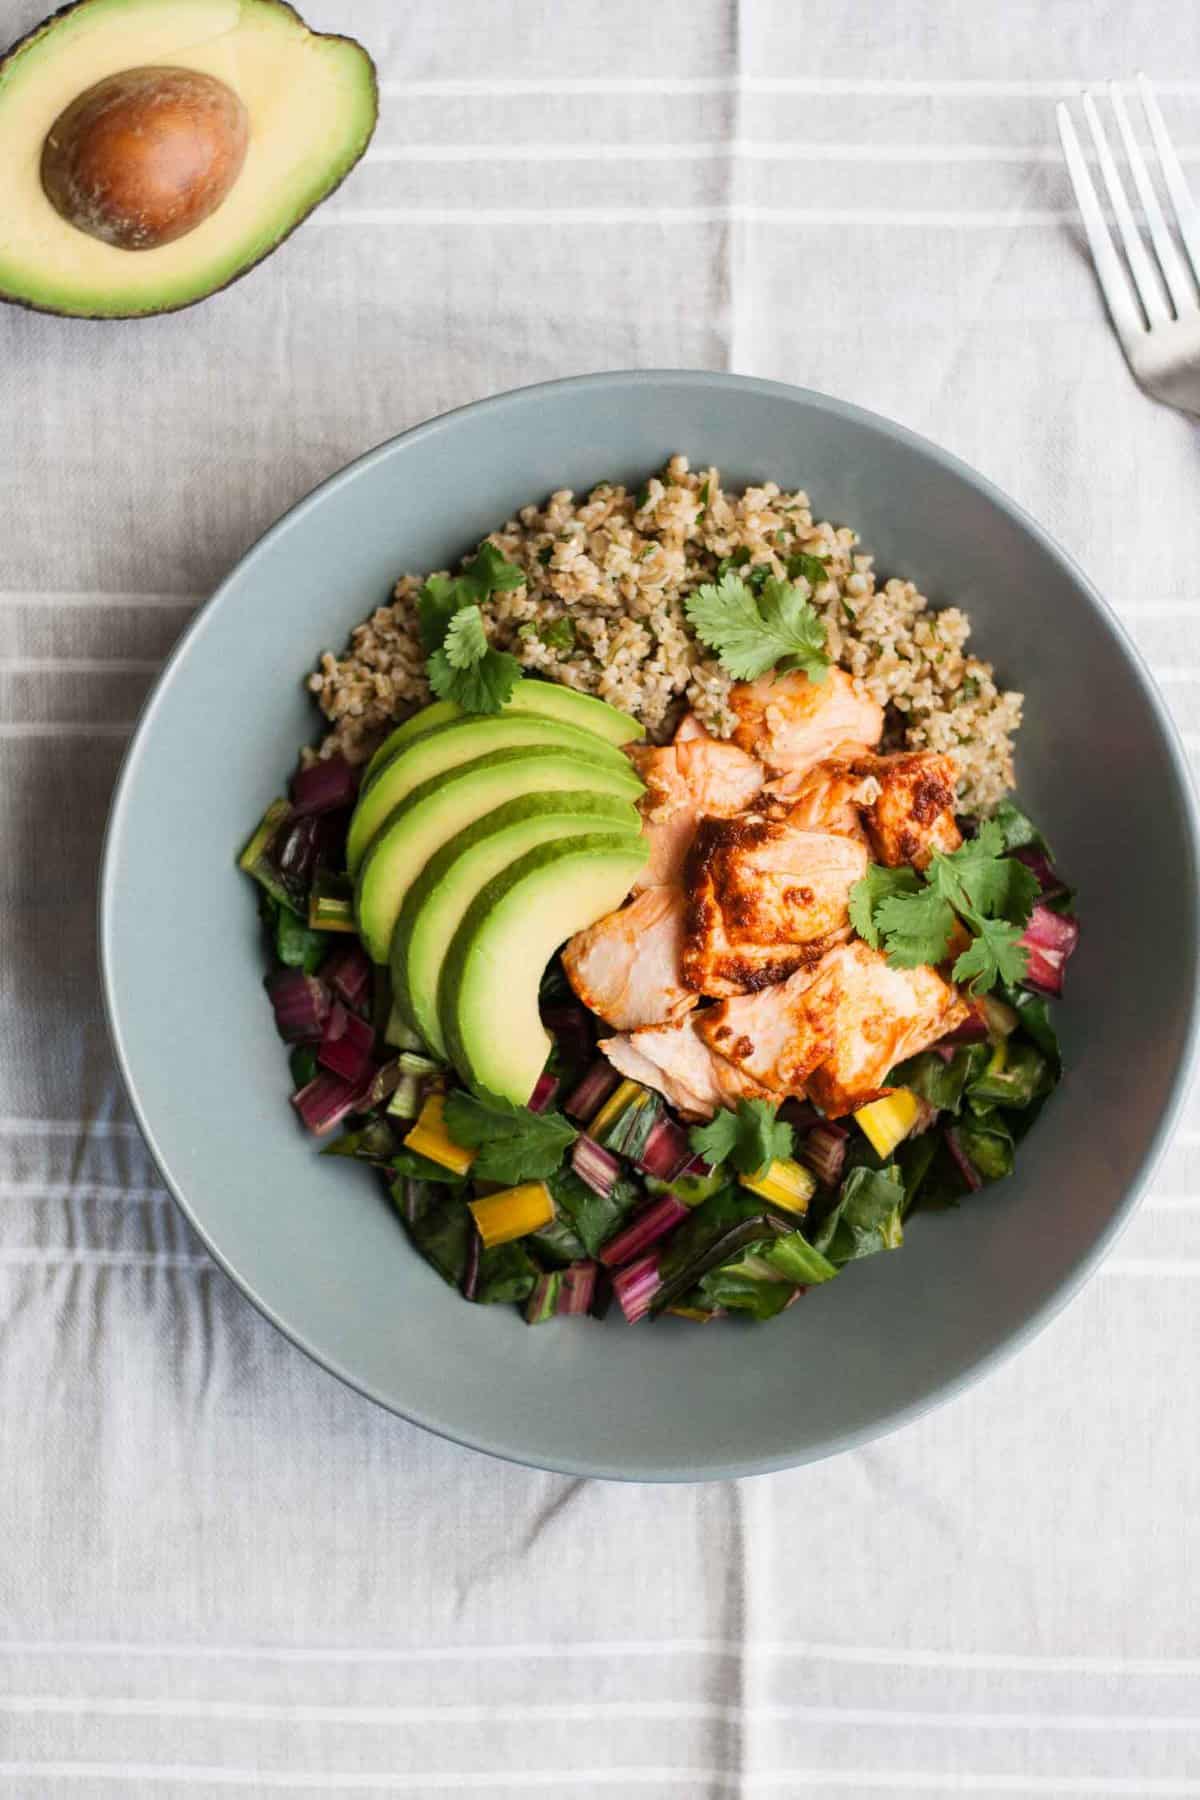 A bowl of grains, salmon and chard with avocado on top.